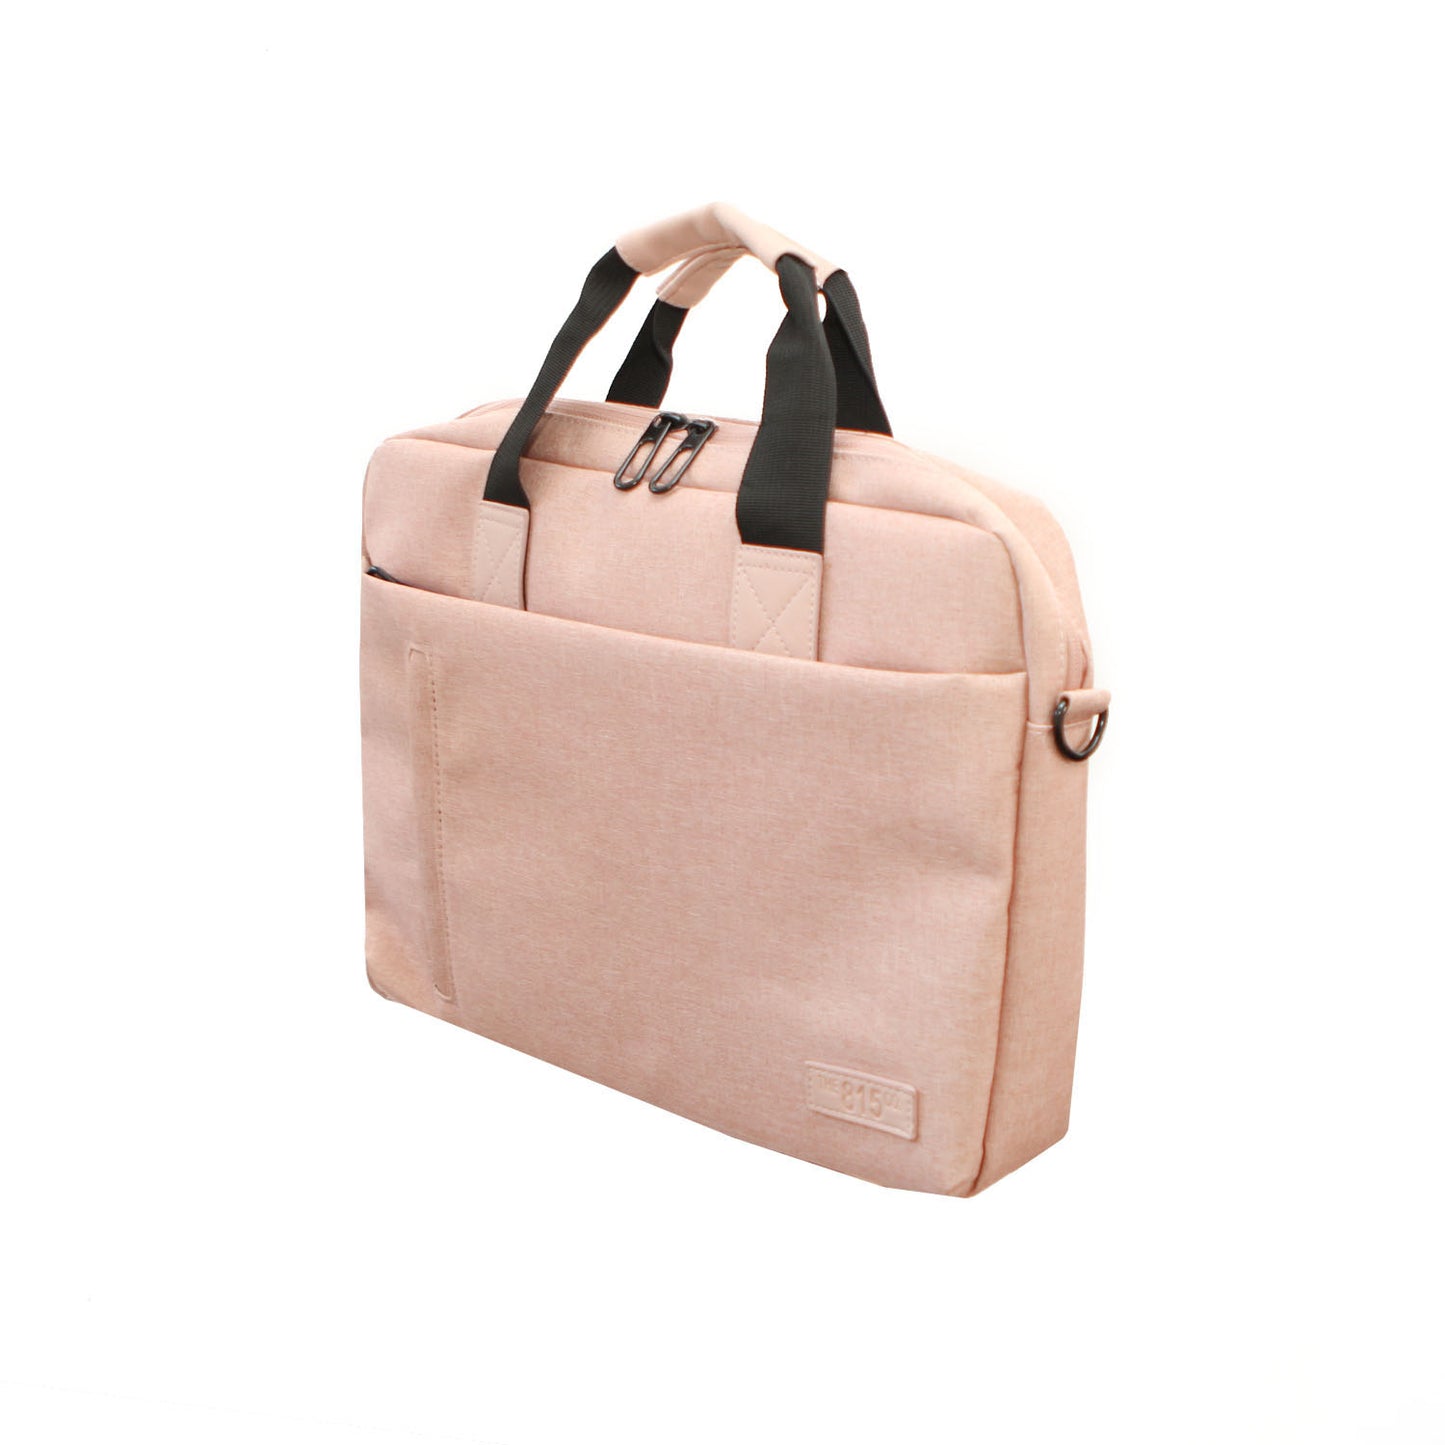 The Serena Laptop Bag in Pink ( 2 sizes: 14" & 18" )